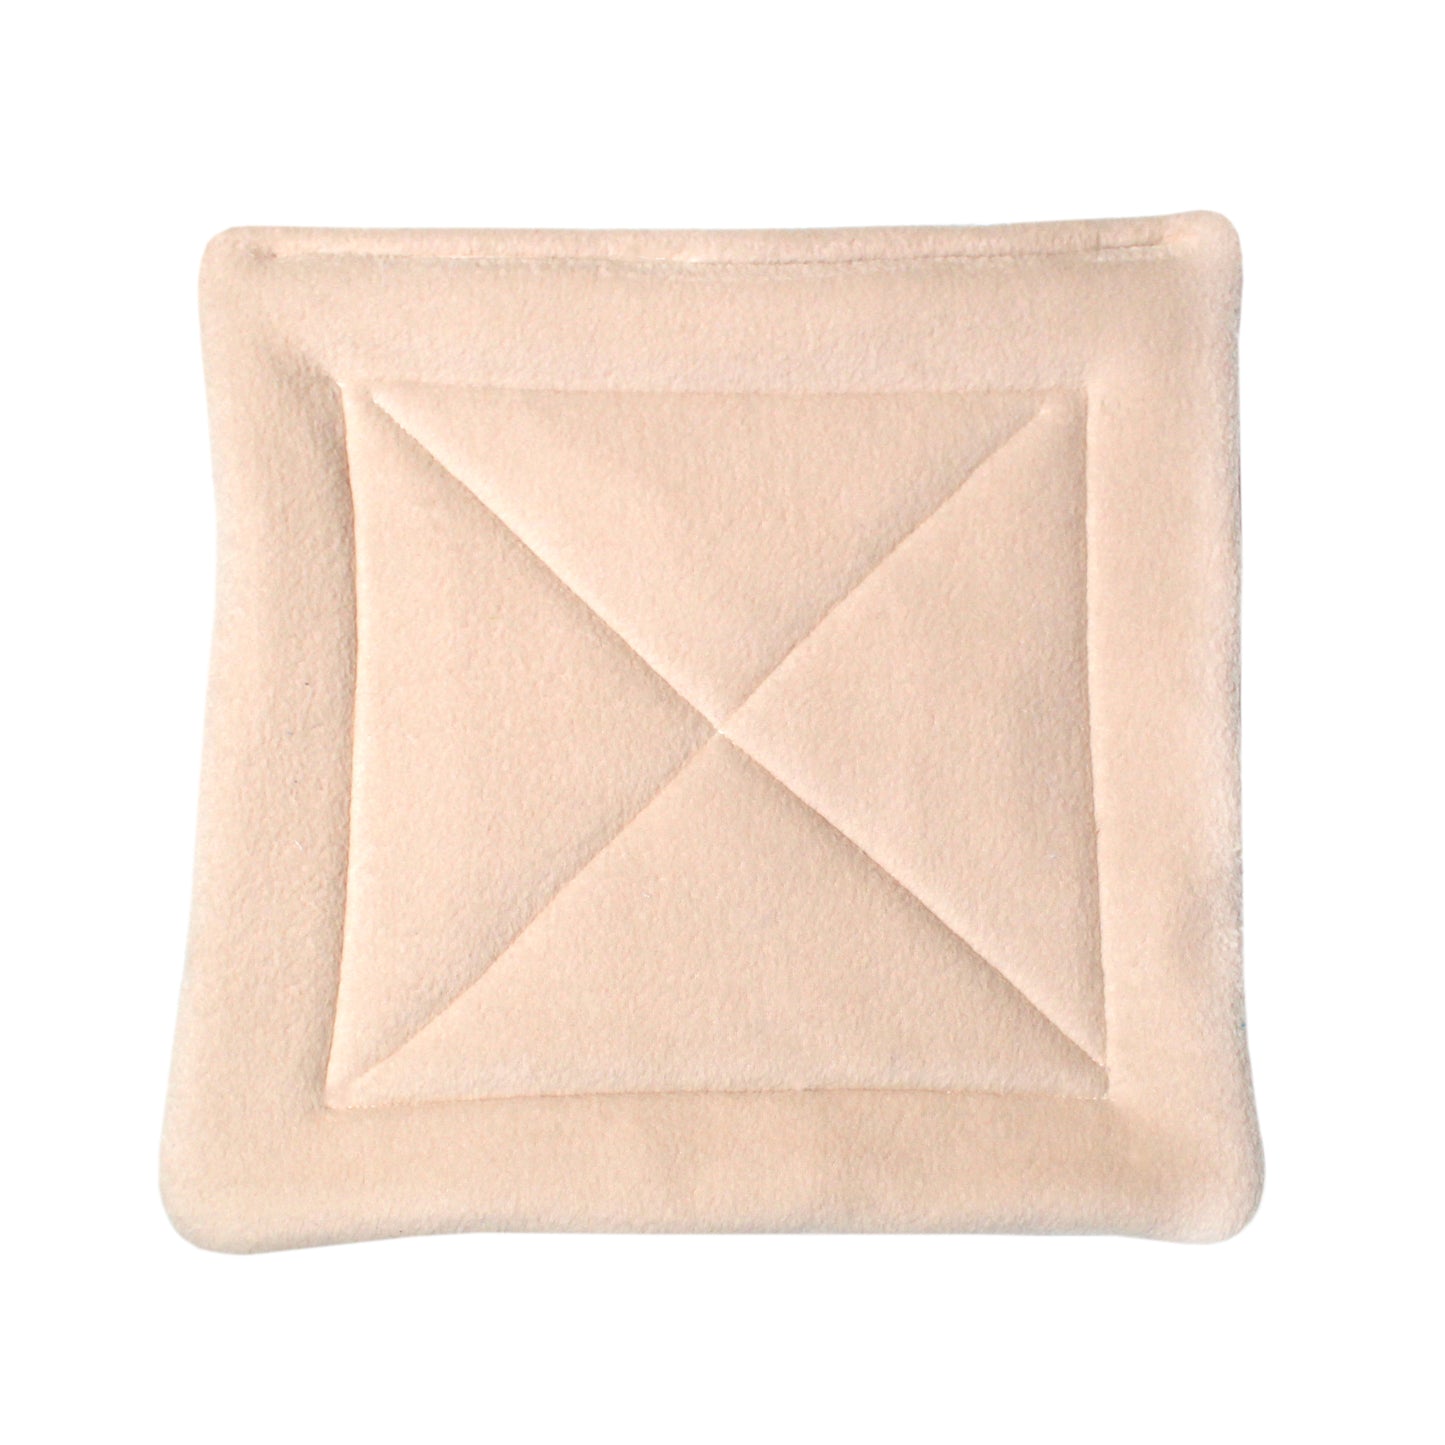 Large Beige Square Pee Pad, top view of the Guinea Pig Pee Pad